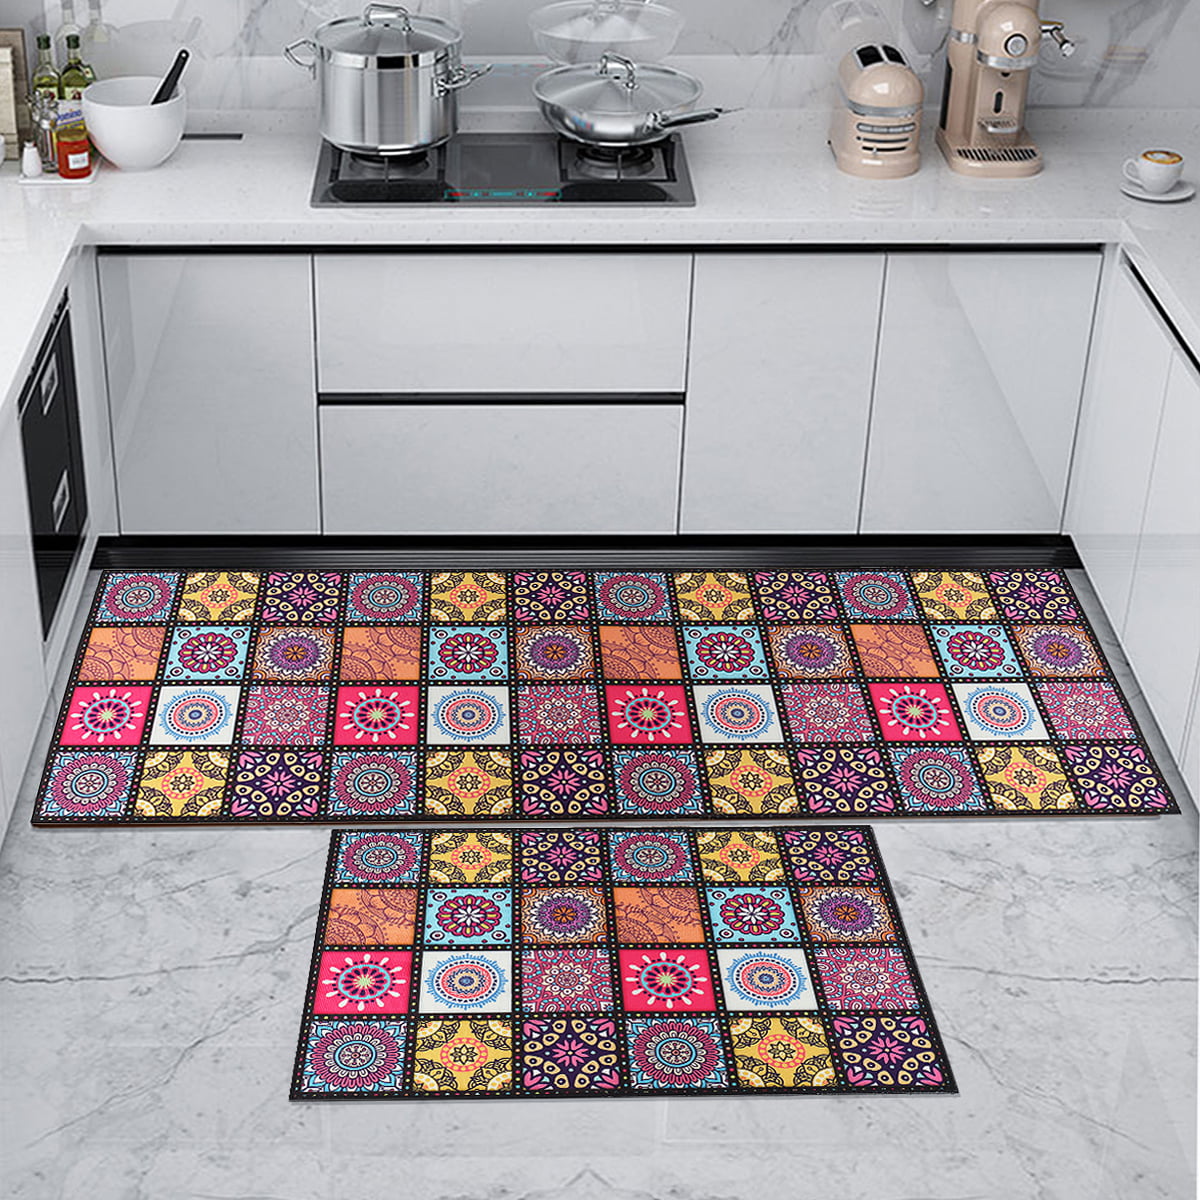 Blue and Pink Floral Fall from Cup Throw Rugs Runner Door Mat Entryway Bedroom Spring Flowers Farm Check Non-Slip Doormat for Laundry Room/ Bathroom/Indoor Rug 16x24 Kitchen Area Rug Floor Tassels 